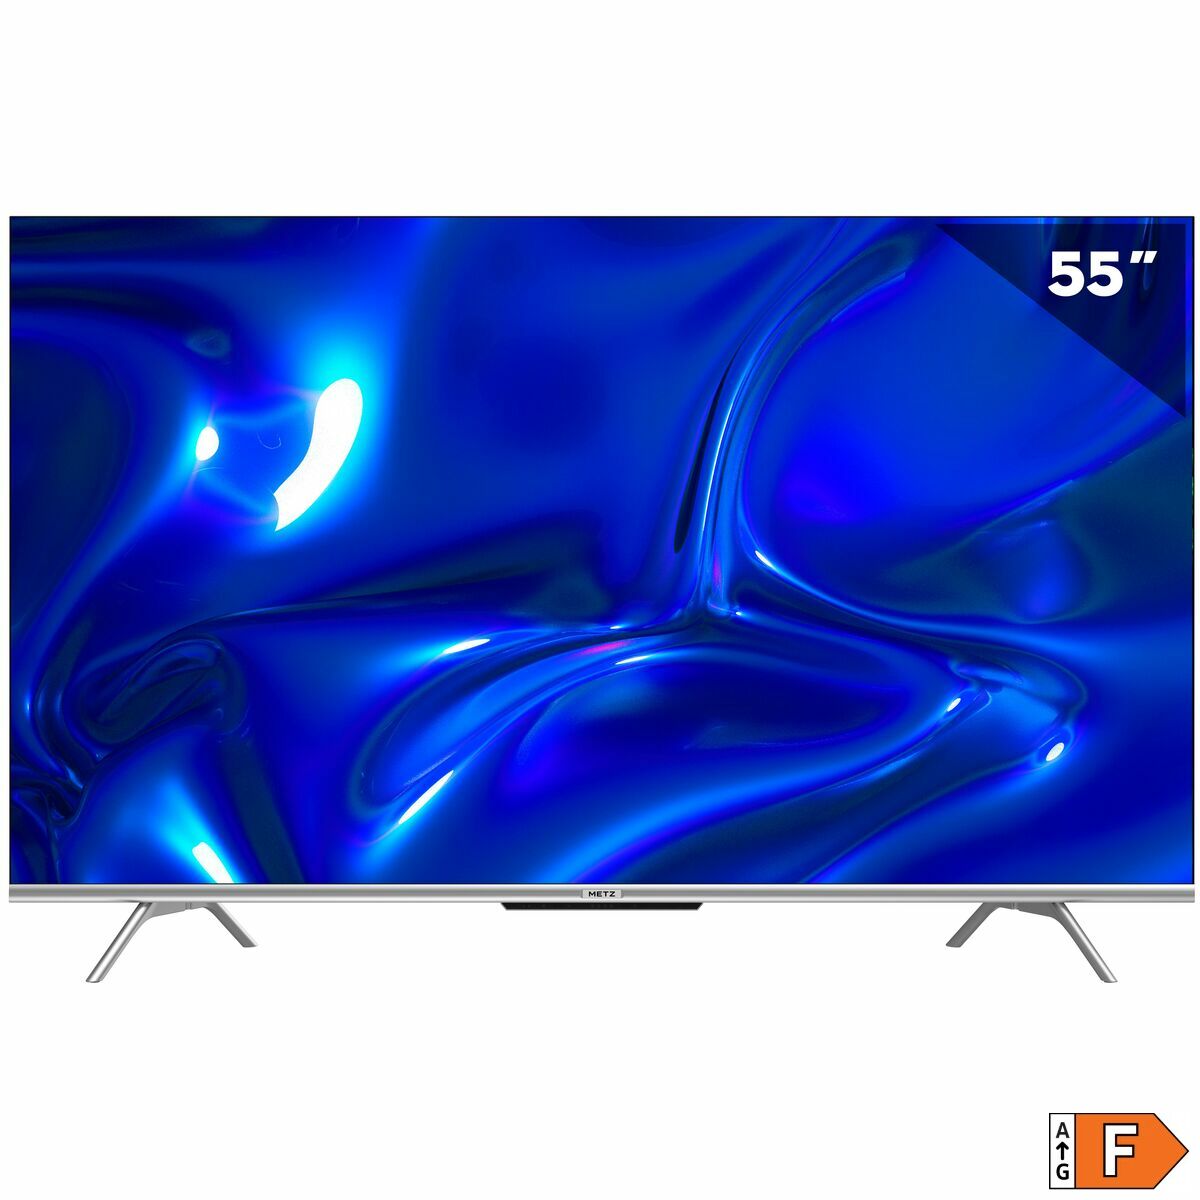 Smart TV Metz 55MUD7000Y Full HD 55" LED, Metz, Electronics, TV, Video and home cinema, smart-tv-metz-55mud7000y-full-hd-55-led, Brand_Metz, category-reference-2609, category-reference-2625, category-reference-2931, category-reference-t-18805, category-reference-t-18827, category-reference-t-19653, cinema and television, Condition_NEW, entertainment, Price_400 - 500, UEFA Euro 2020, RiotNook